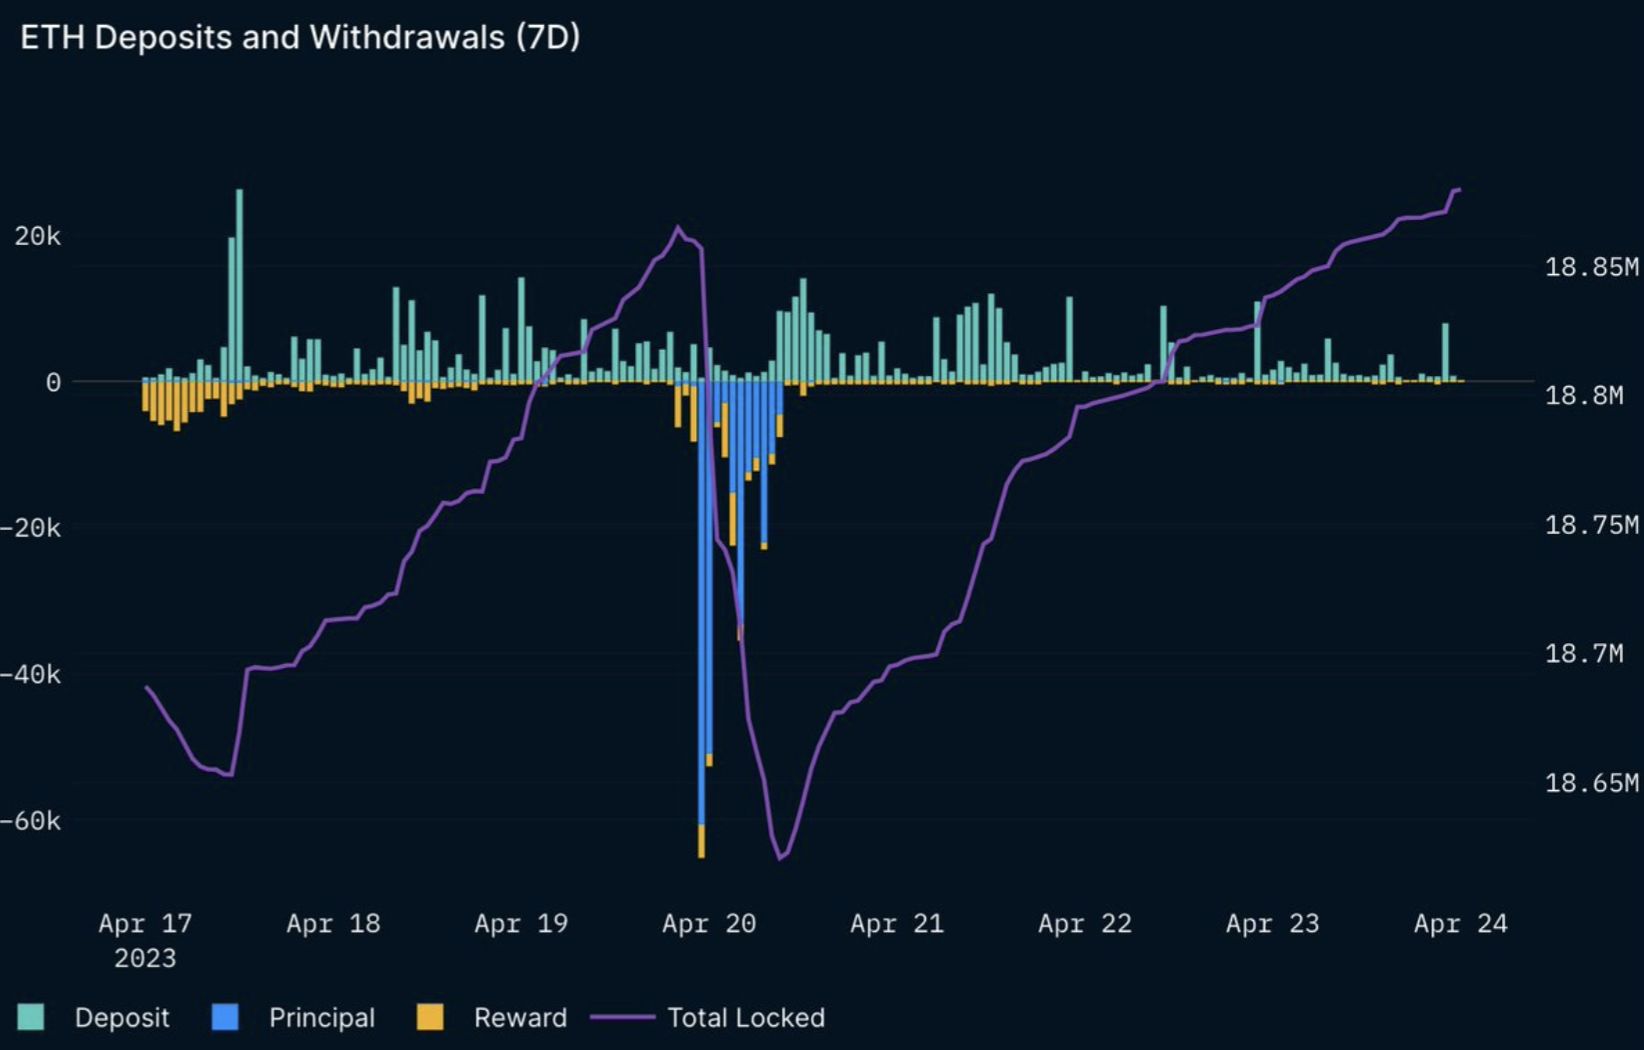 Ethereum deposits and withdrawals